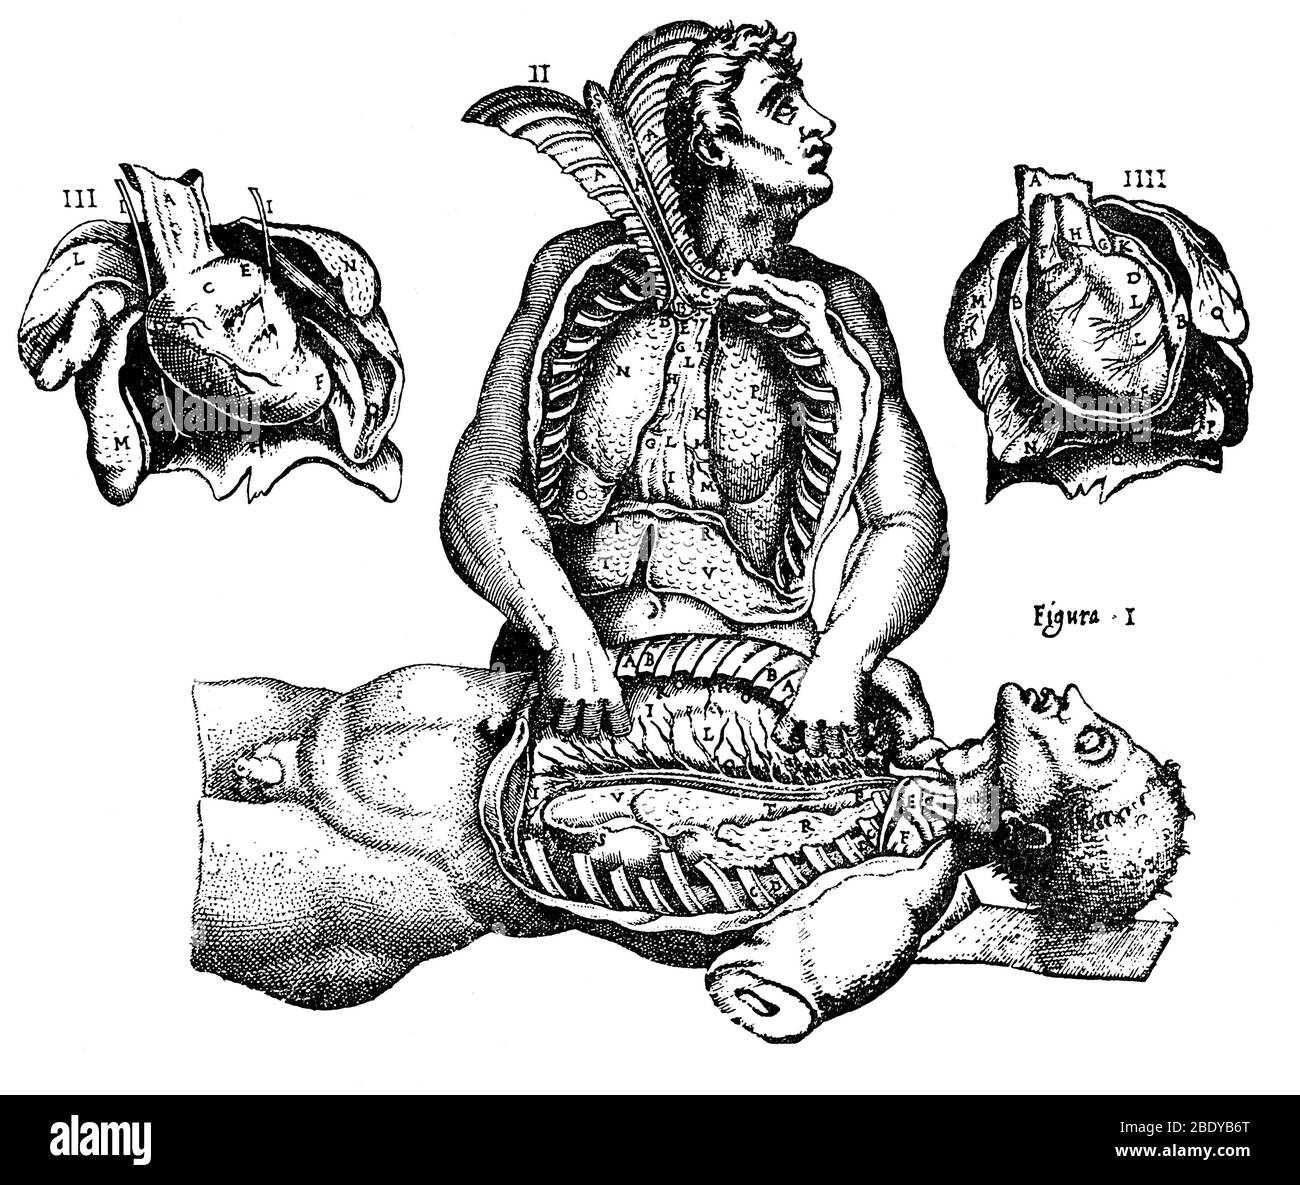 Dissected Cadaver Dissecting Cadaver, 1556 Stock Photo